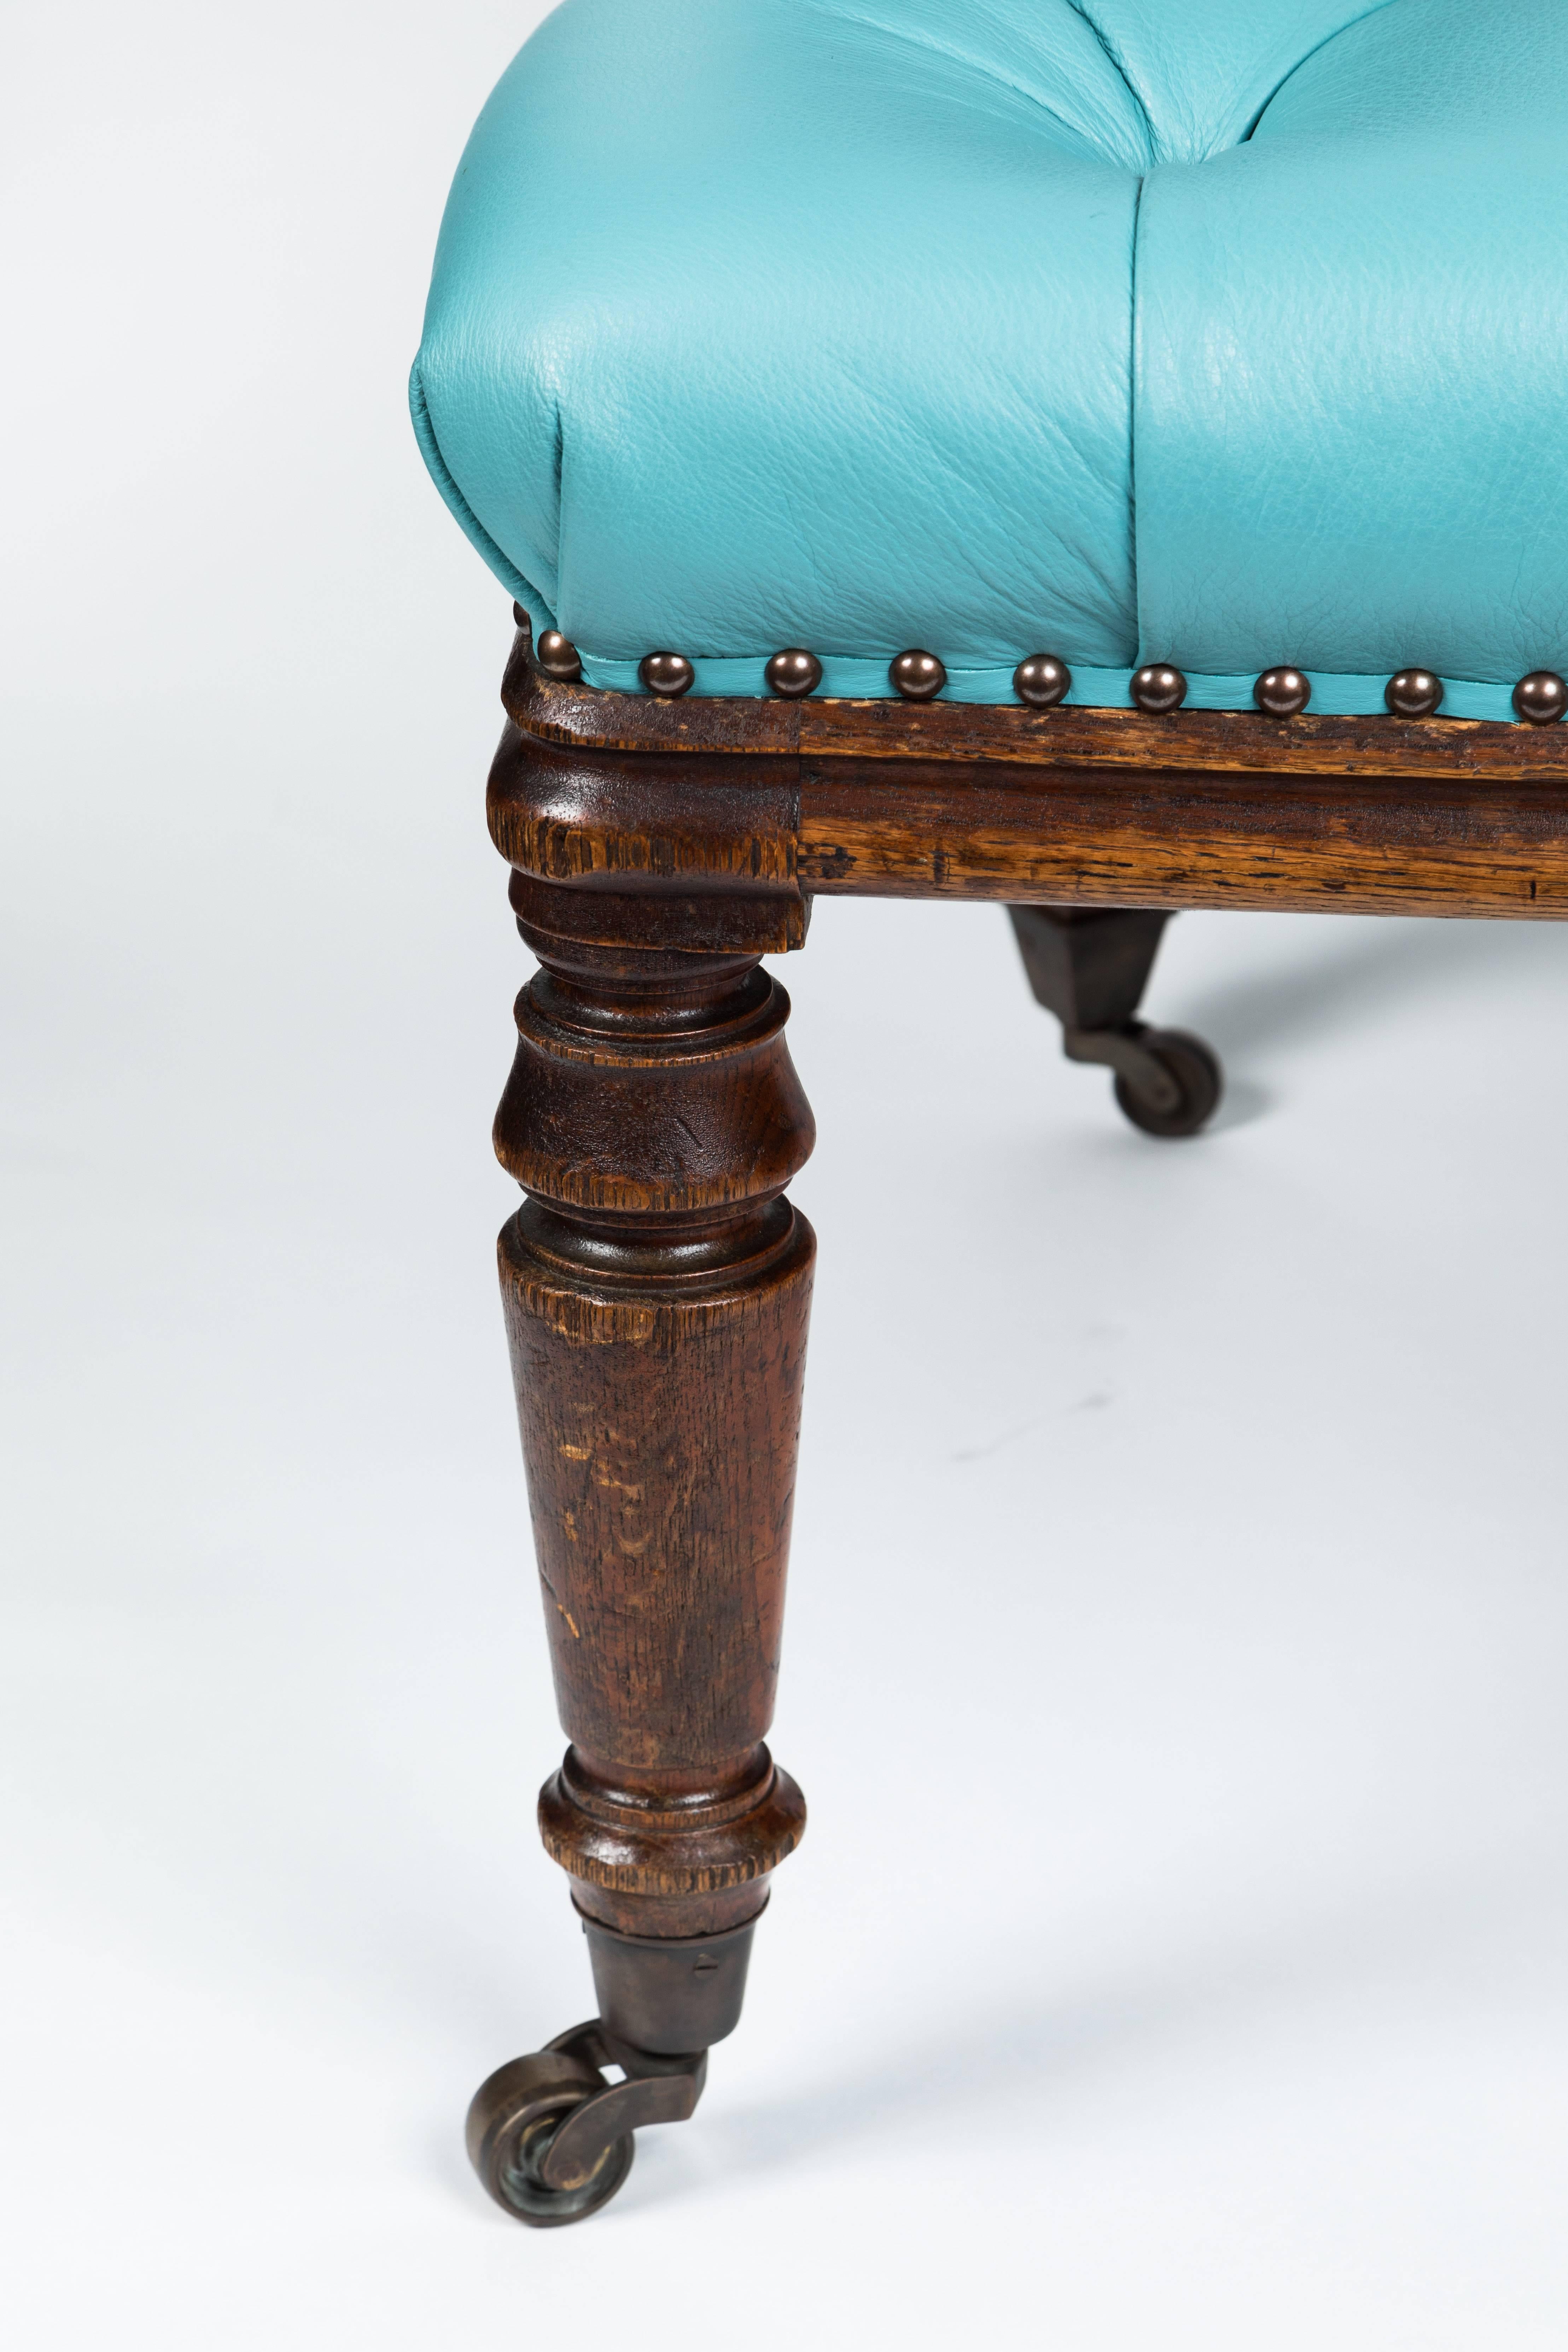 turquoise leather chair